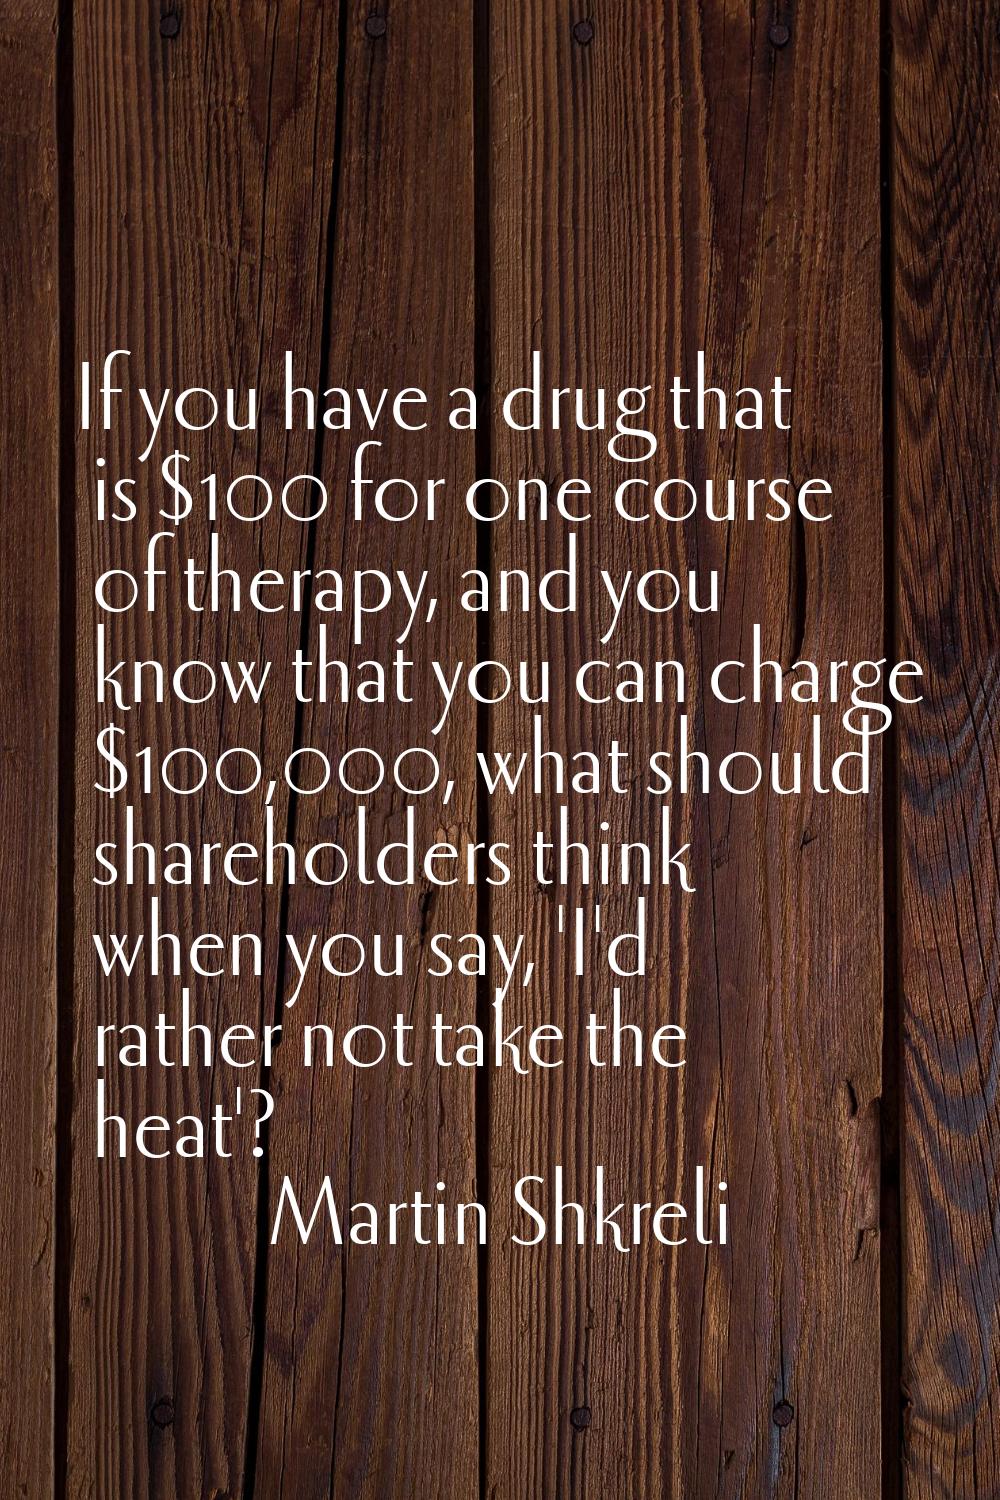 If you have a drug that is $100 for one course of therapy, and you know that you can charge $100,00